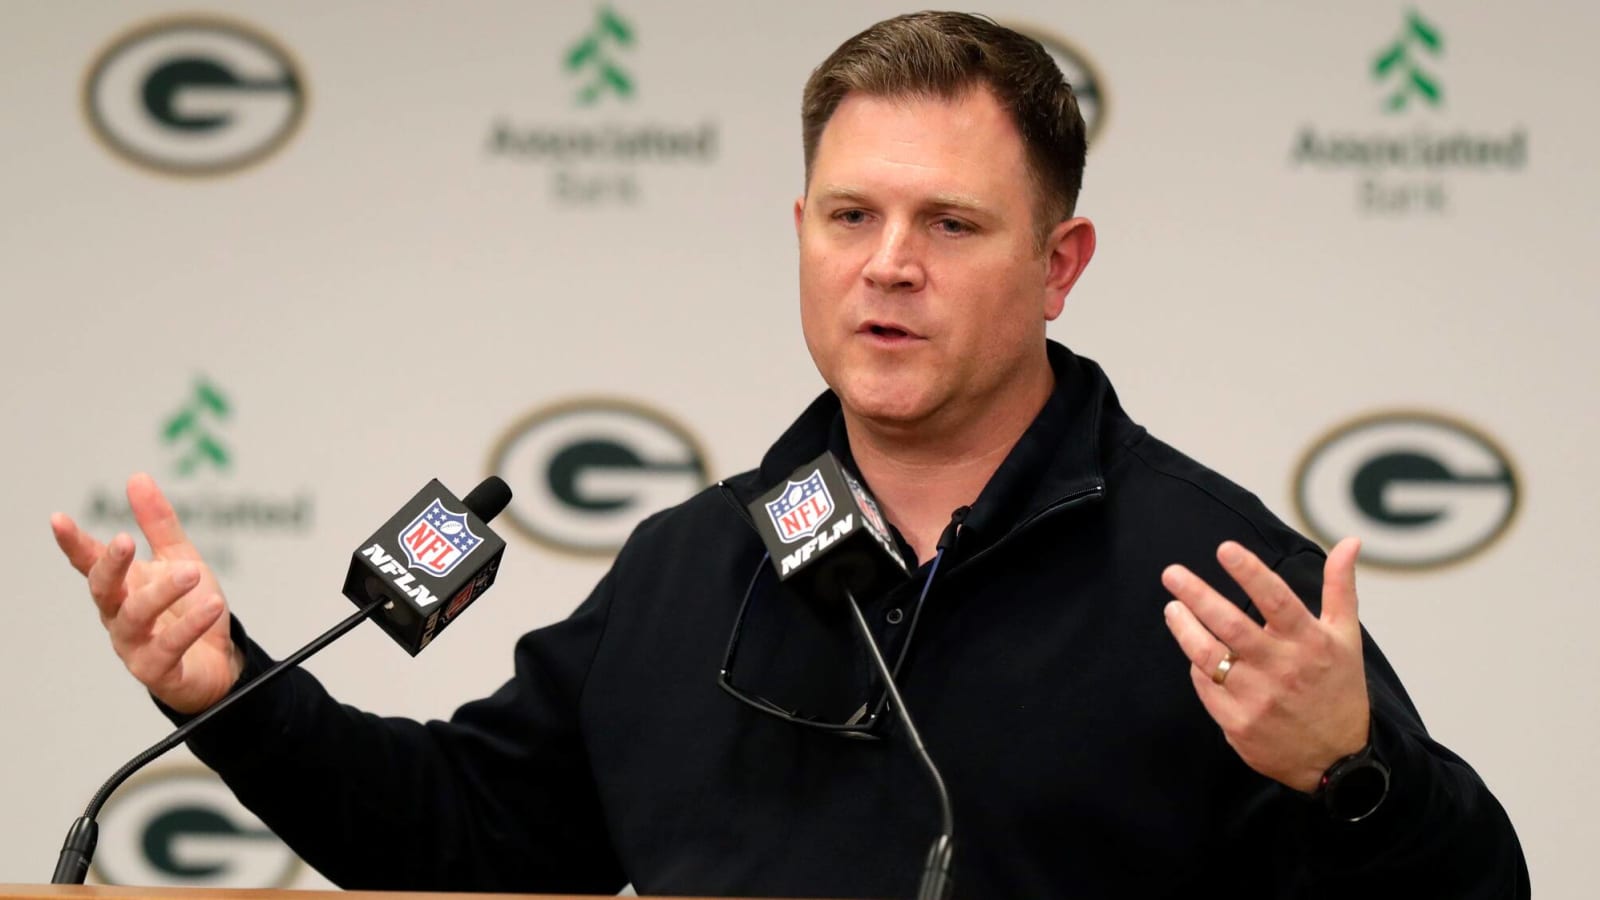 Packers GM reportedly made telling comment about Aaron Rodgers